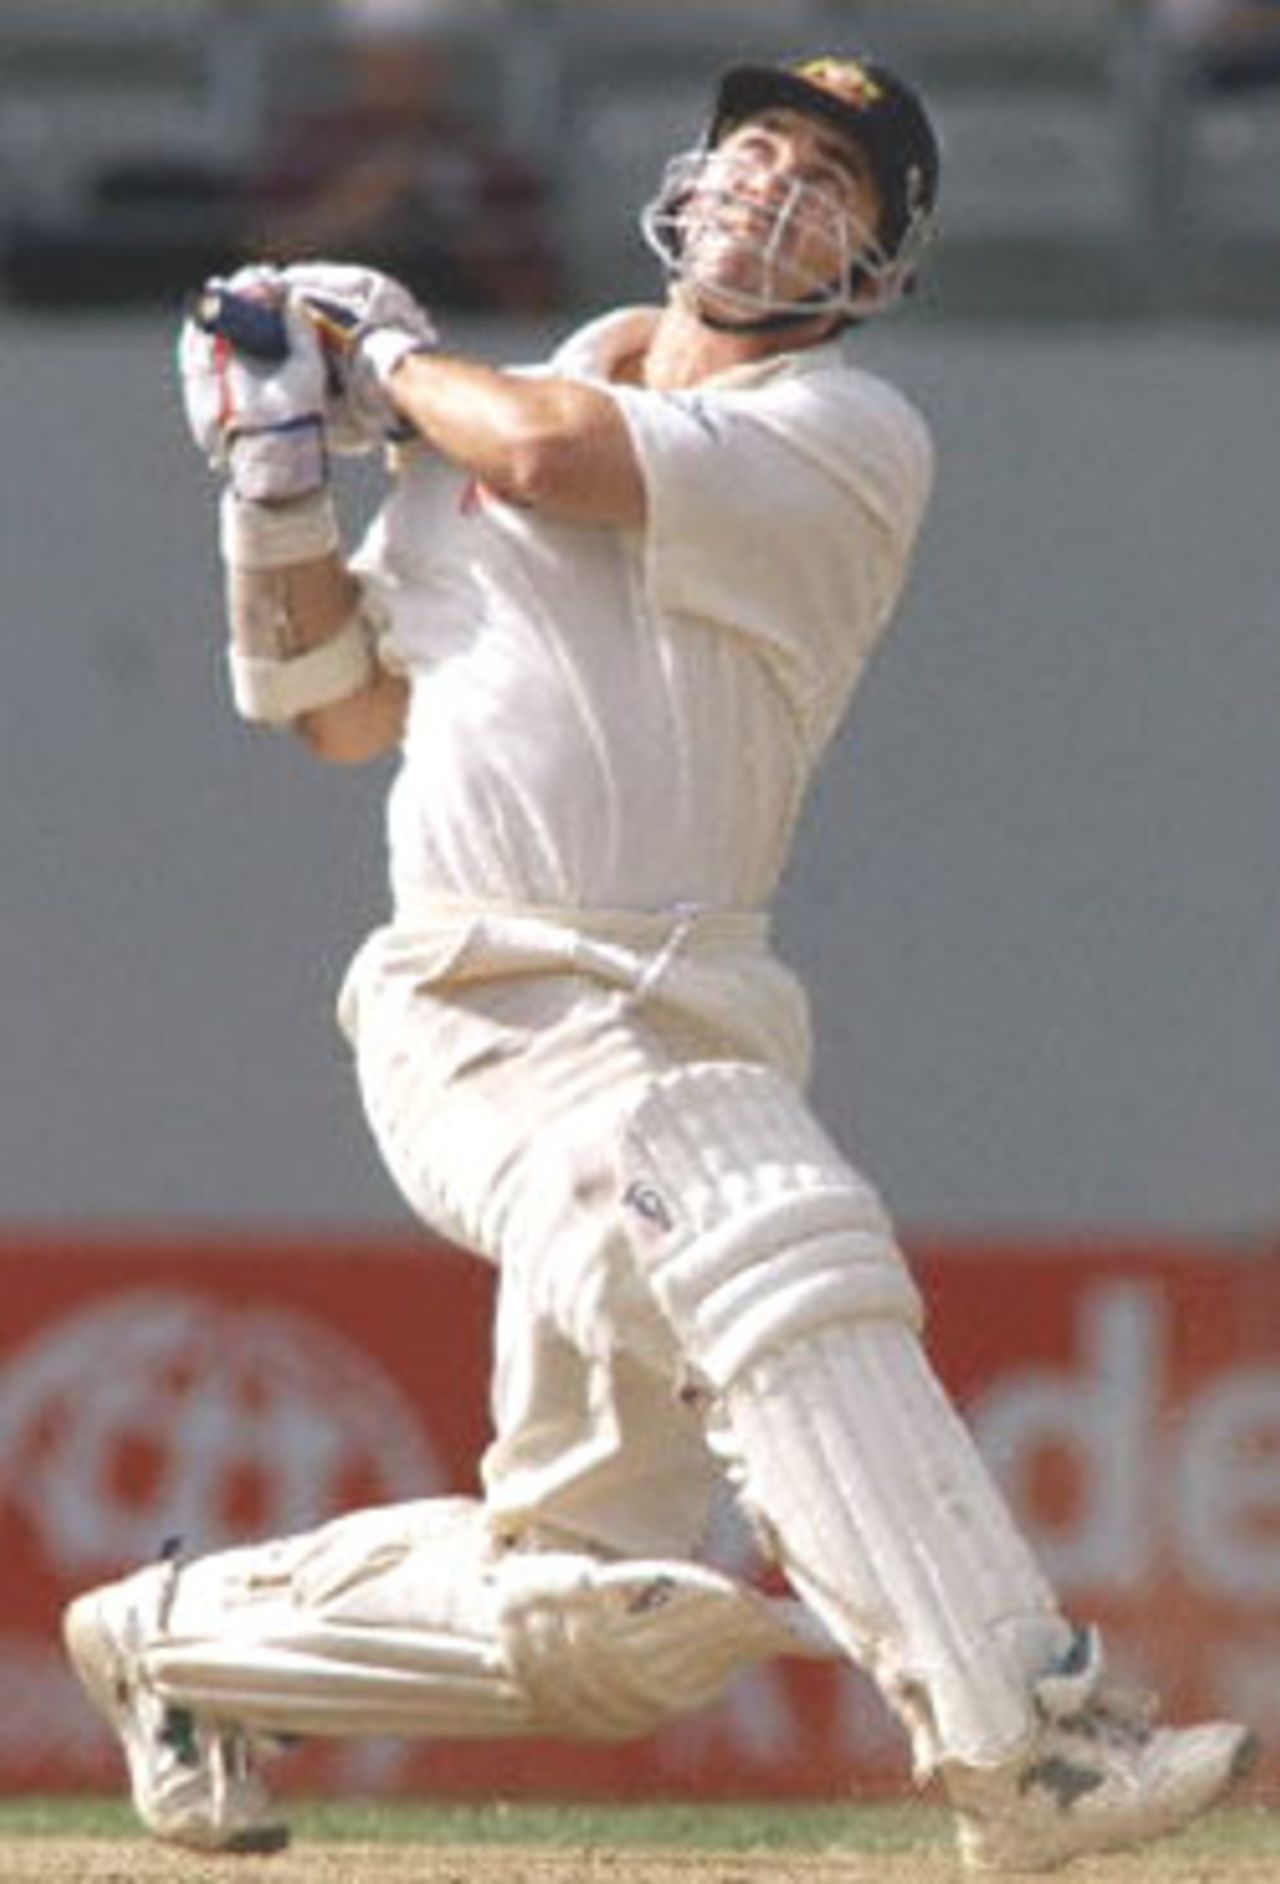 Australian batsman Justin Langer skies a ball to the outfield to be caught off the bowling of New Zealand's Daniel Vettori on the second day of the first Test match played at Eden Park in Auckland 12 March 2000. Australia dismissed New Zealand for 163 in their first innings and Australia in their second innings is 114-5 for a lead of 165 runs at stumps.